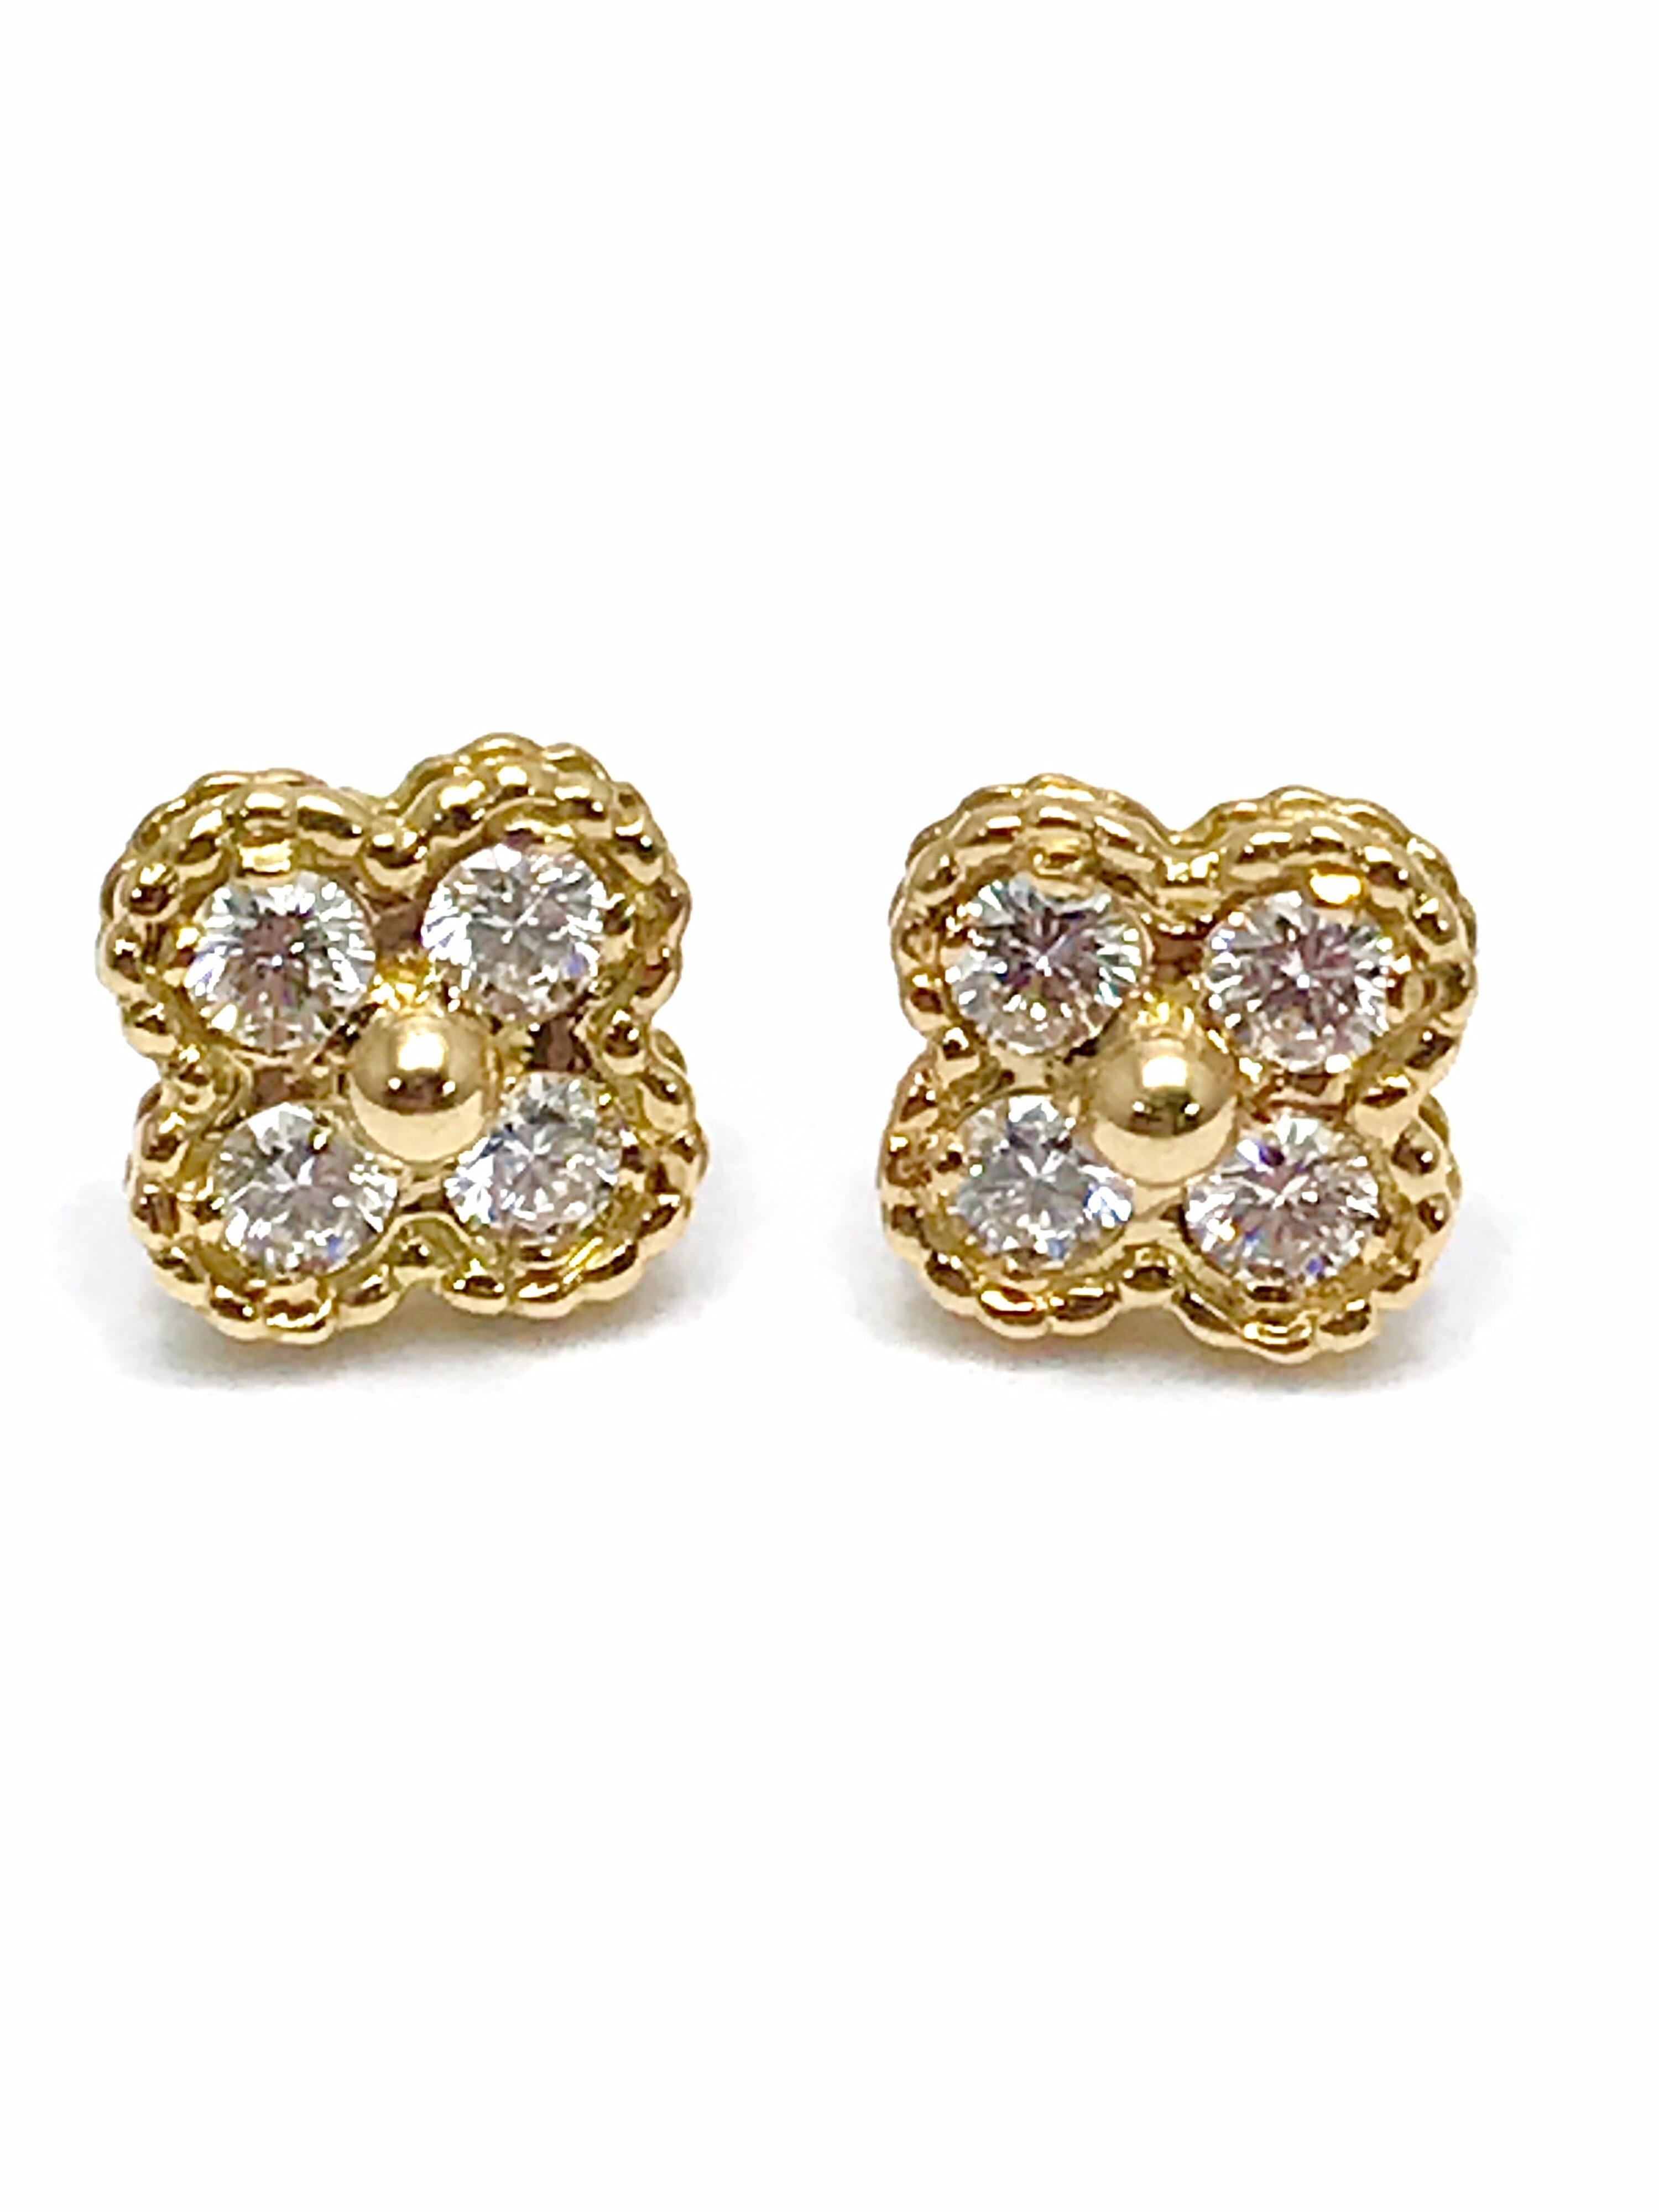 A gorgeoius pair of vintage Van Cleef & Arpels Alhambra Diamond and 18K yellow gold earrings.  These are an iconic piece from the collection.  There are eight round brilliant Diamonds weighing 0.56 carats that are E color, VVS clarity.  The earrings